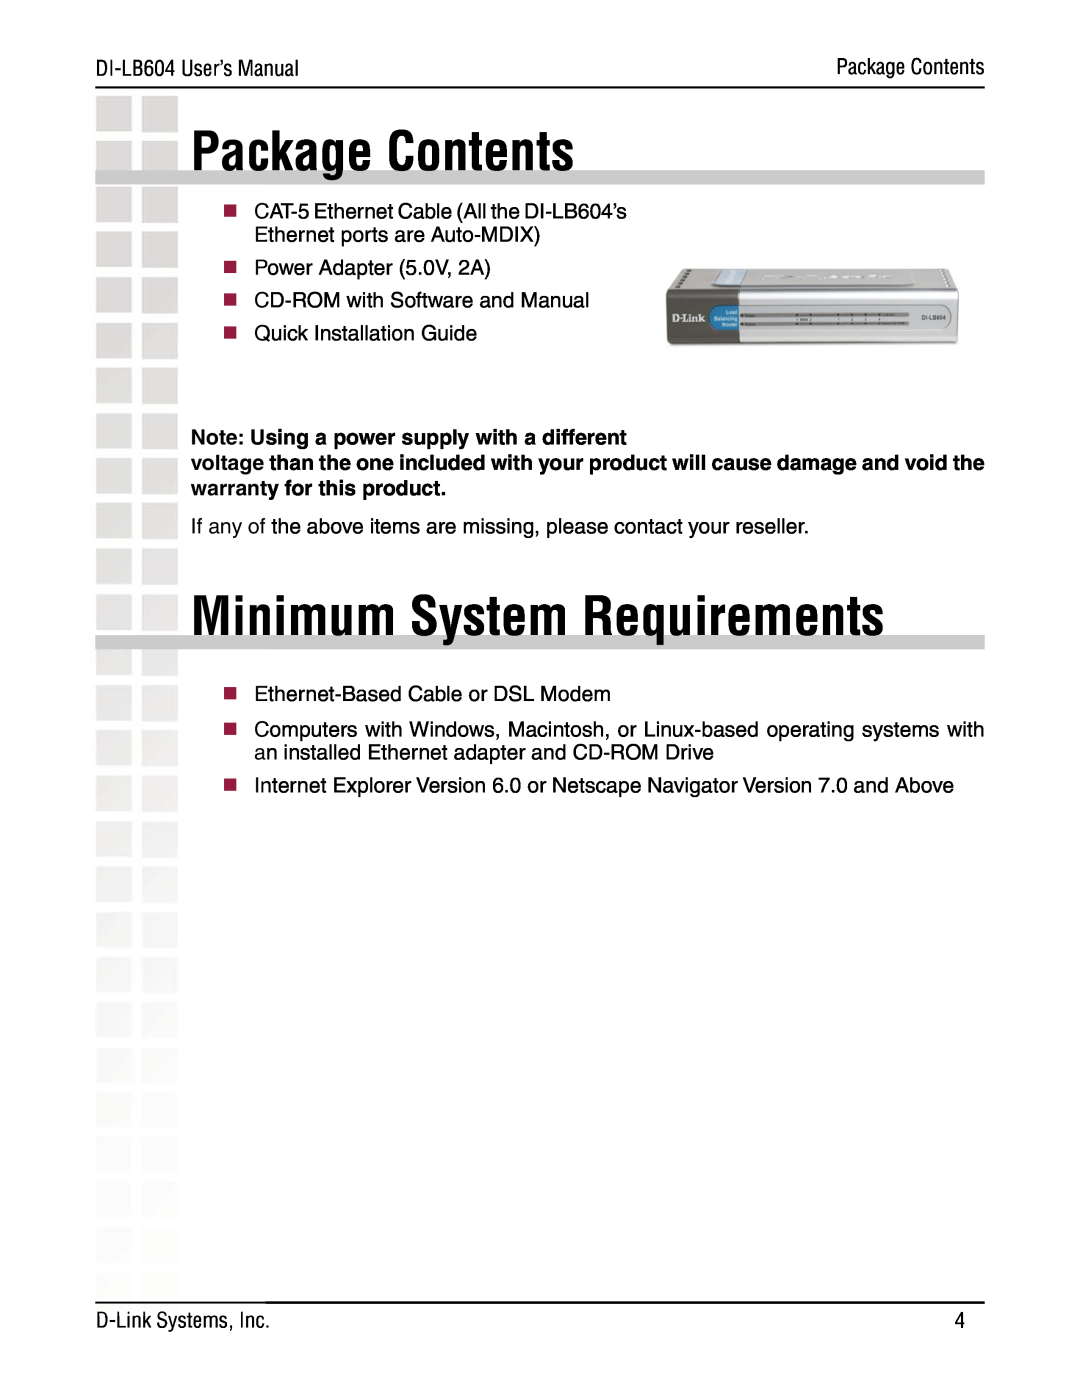 D-Link DI-LB604 manual Package Contents, Minimum System Requirements, Note Using a power supply with a different 